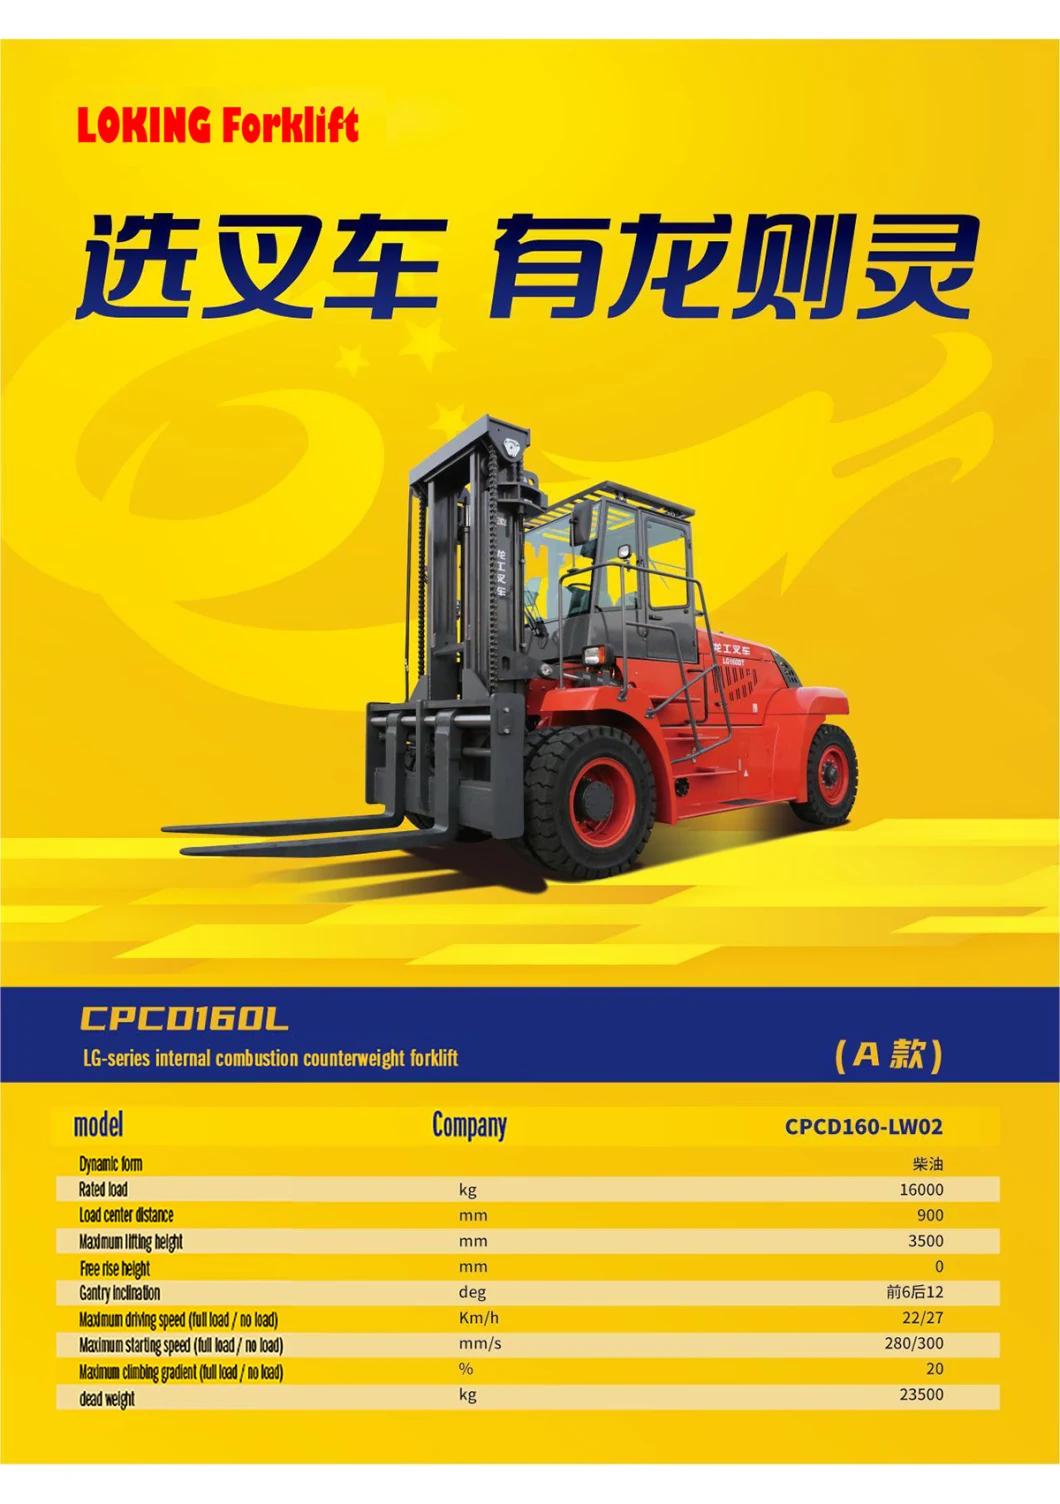 High Quality Construction Machinery 12 Ton Diesel Forklift for Lifting Materials